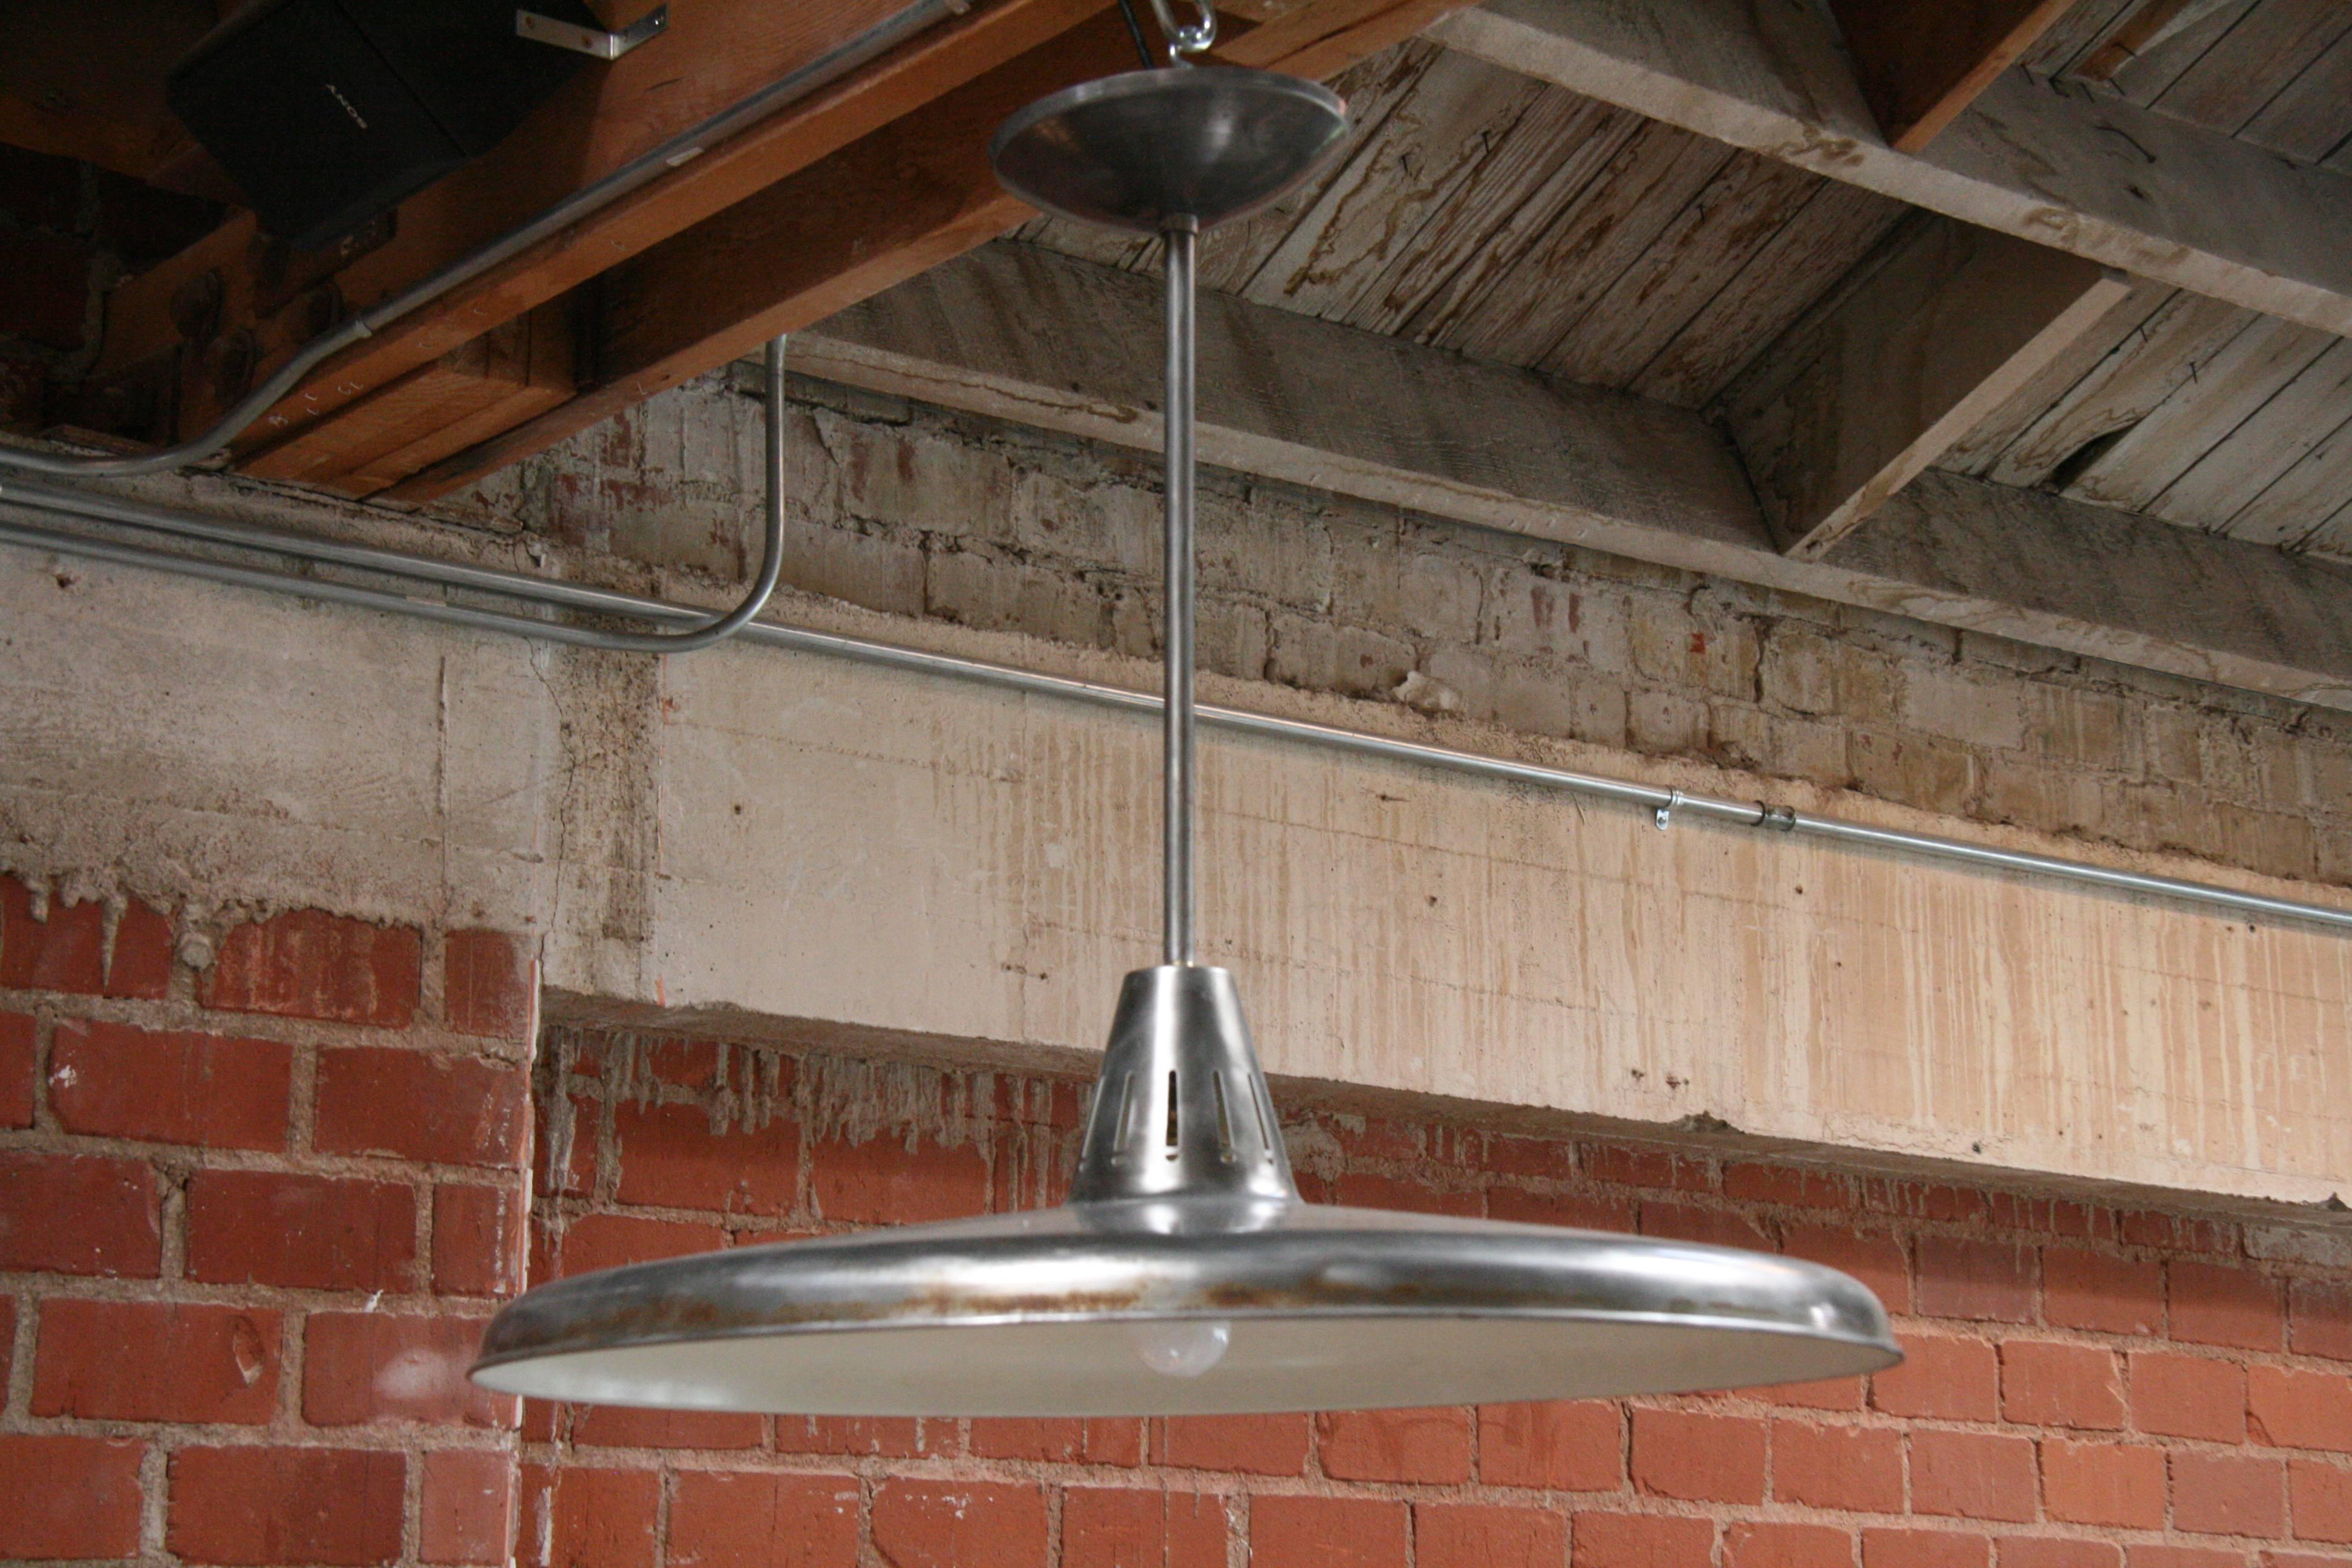 Sleek, stainless looking, sophisticated, sassy and super sized lights.